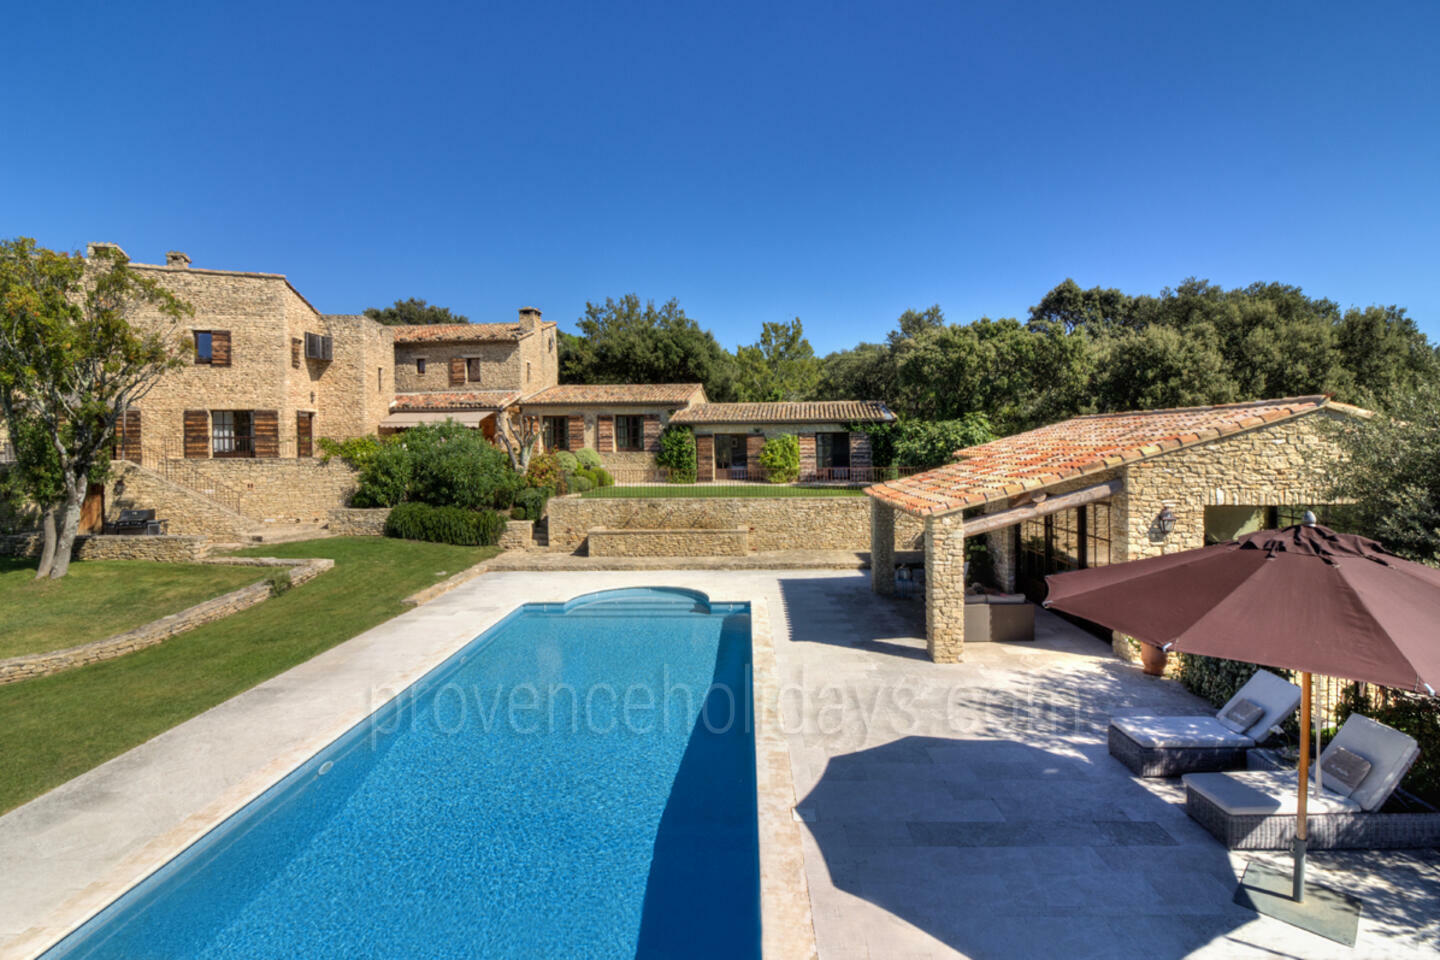 Fantastic Property with Luxury Pool House in the Luberon 1 - Mas des Fonts: Villa: Exterior